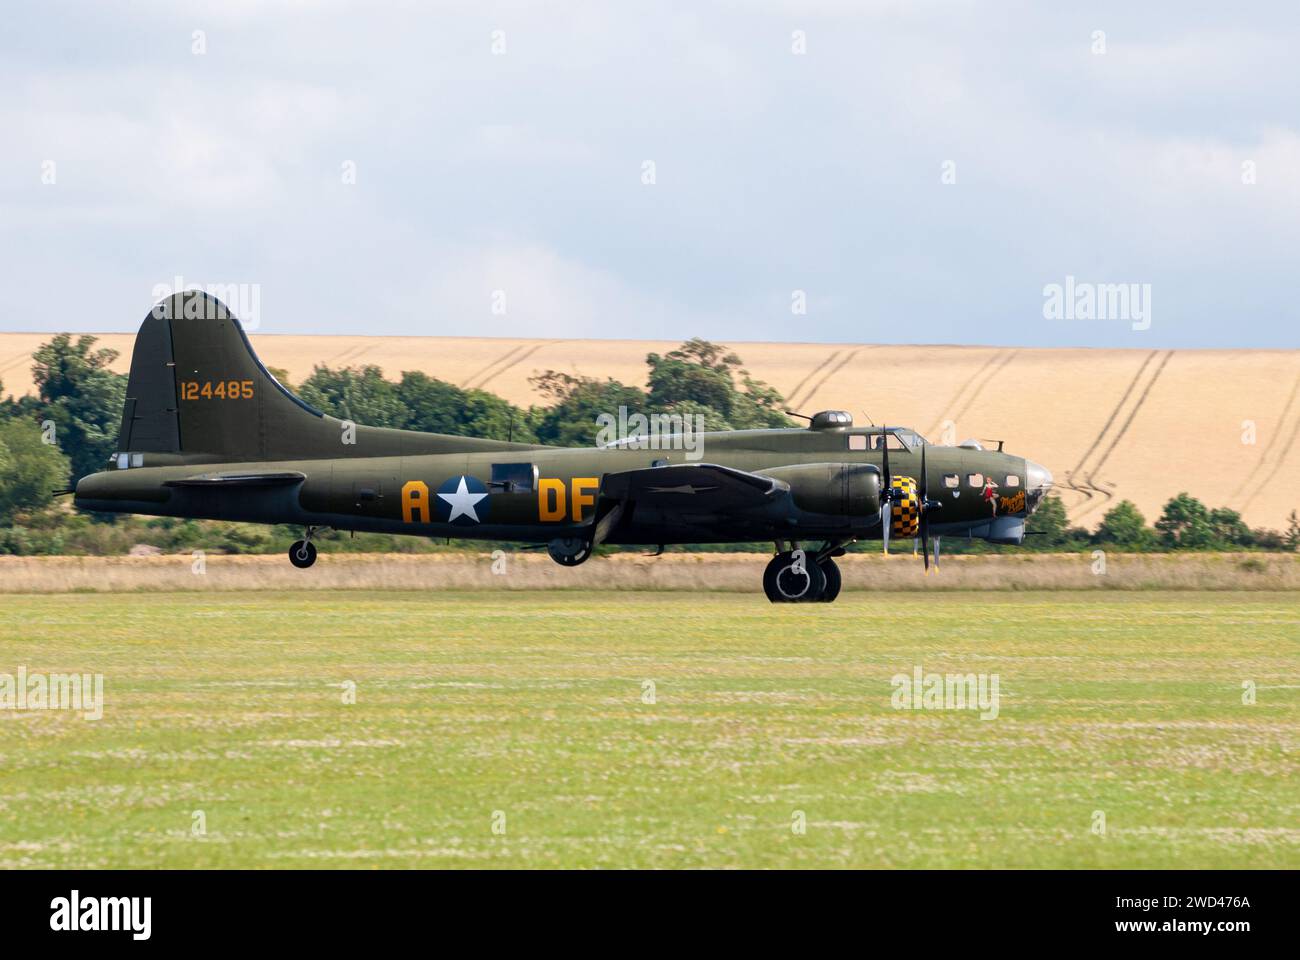 Boeing B-17G Flying Fortress '124485' WW2 Bomber plane representing the famous 'Memphis Belle' landing on grass runway Stock Photo